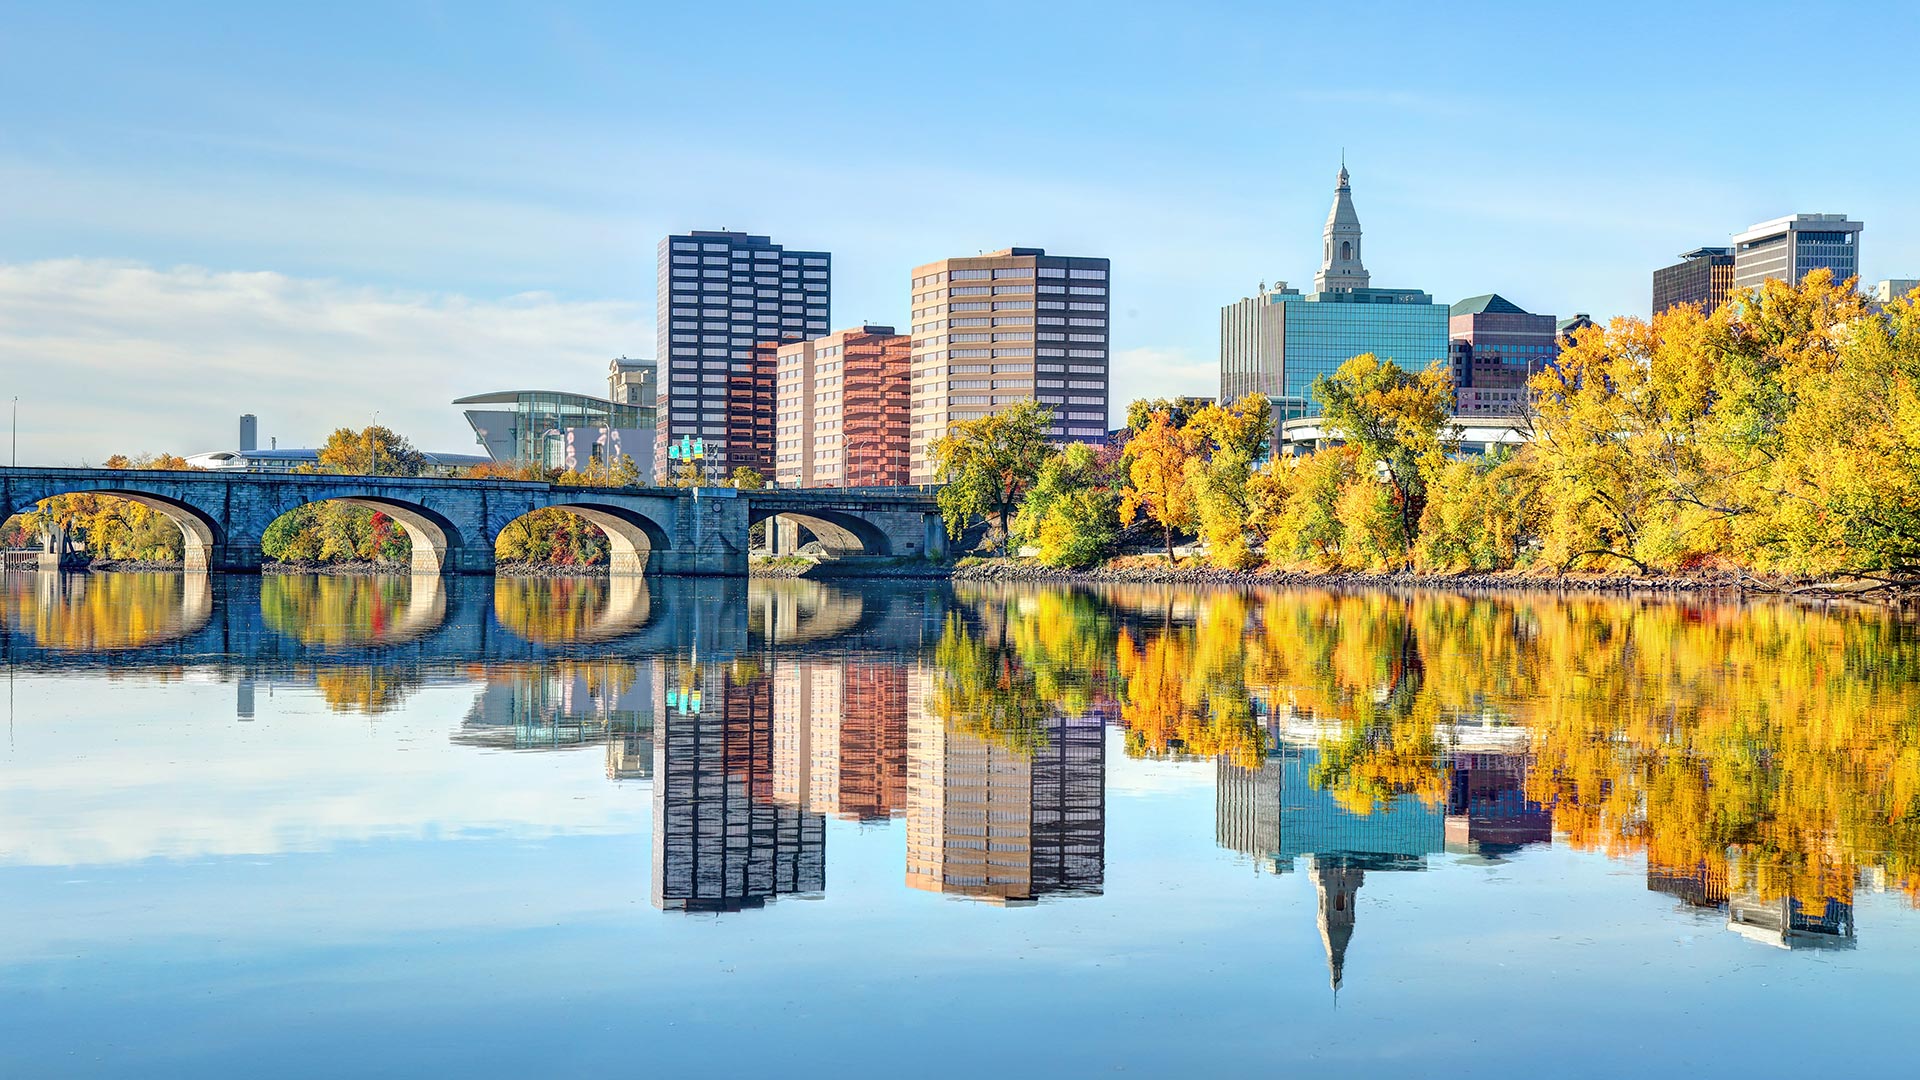 A view of the Connecticut River and skyline in autumn in Hartford, Connecticut